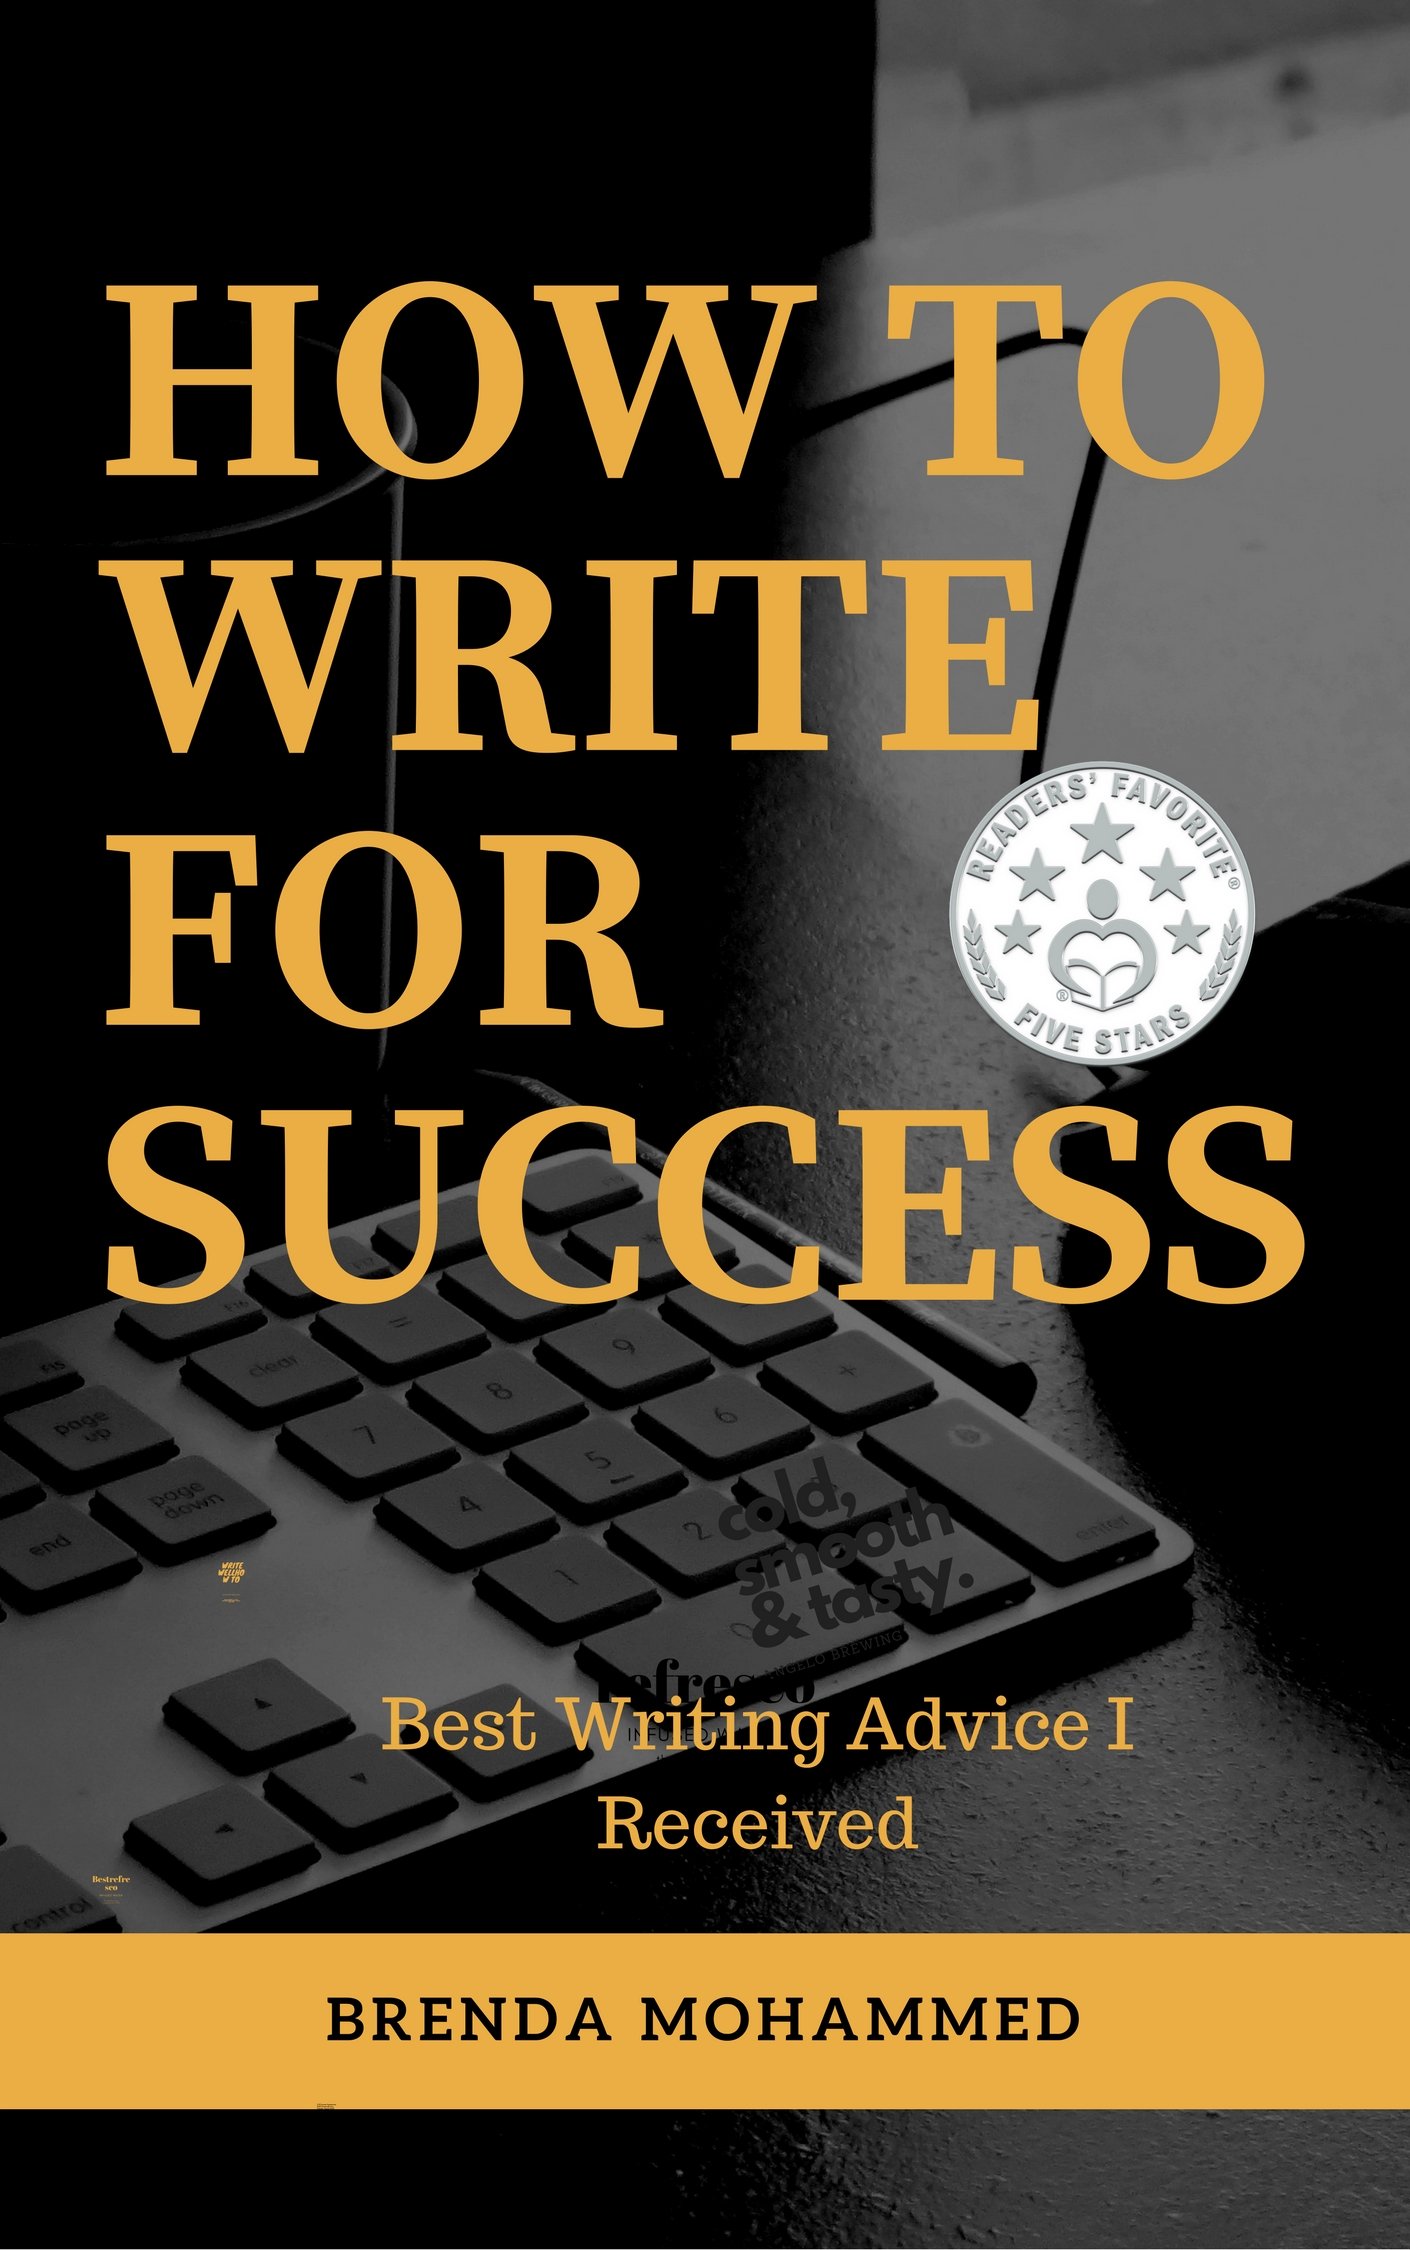 HOW TO WRITE FOR SUCCESS VOLUME ONE